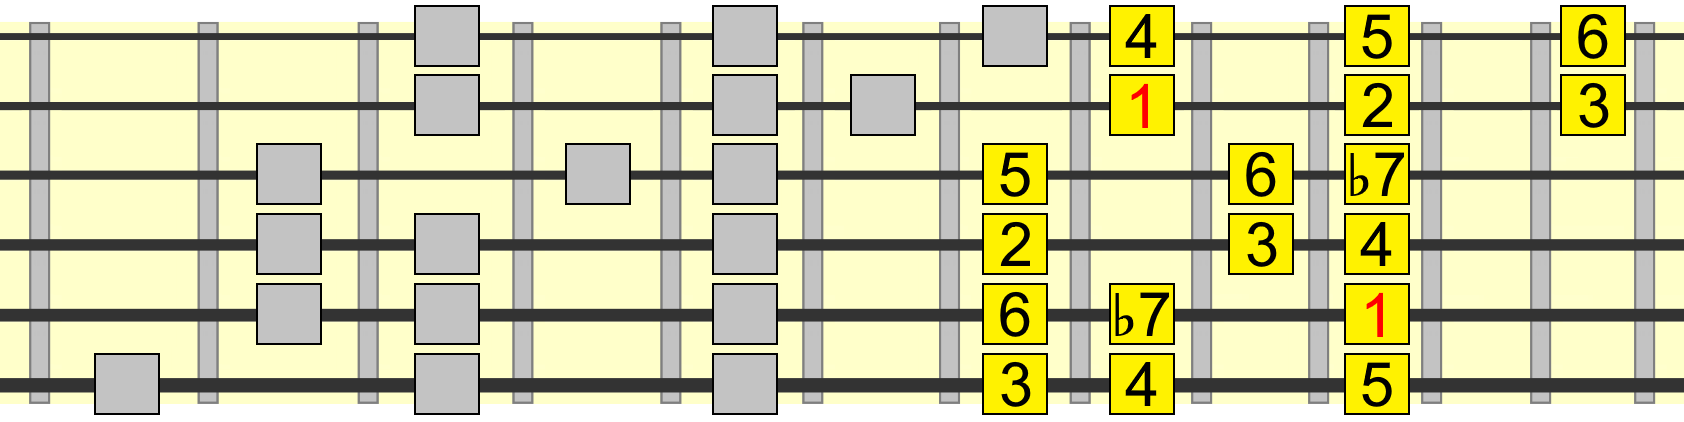 extended 1 chord mixolydian blues pattern